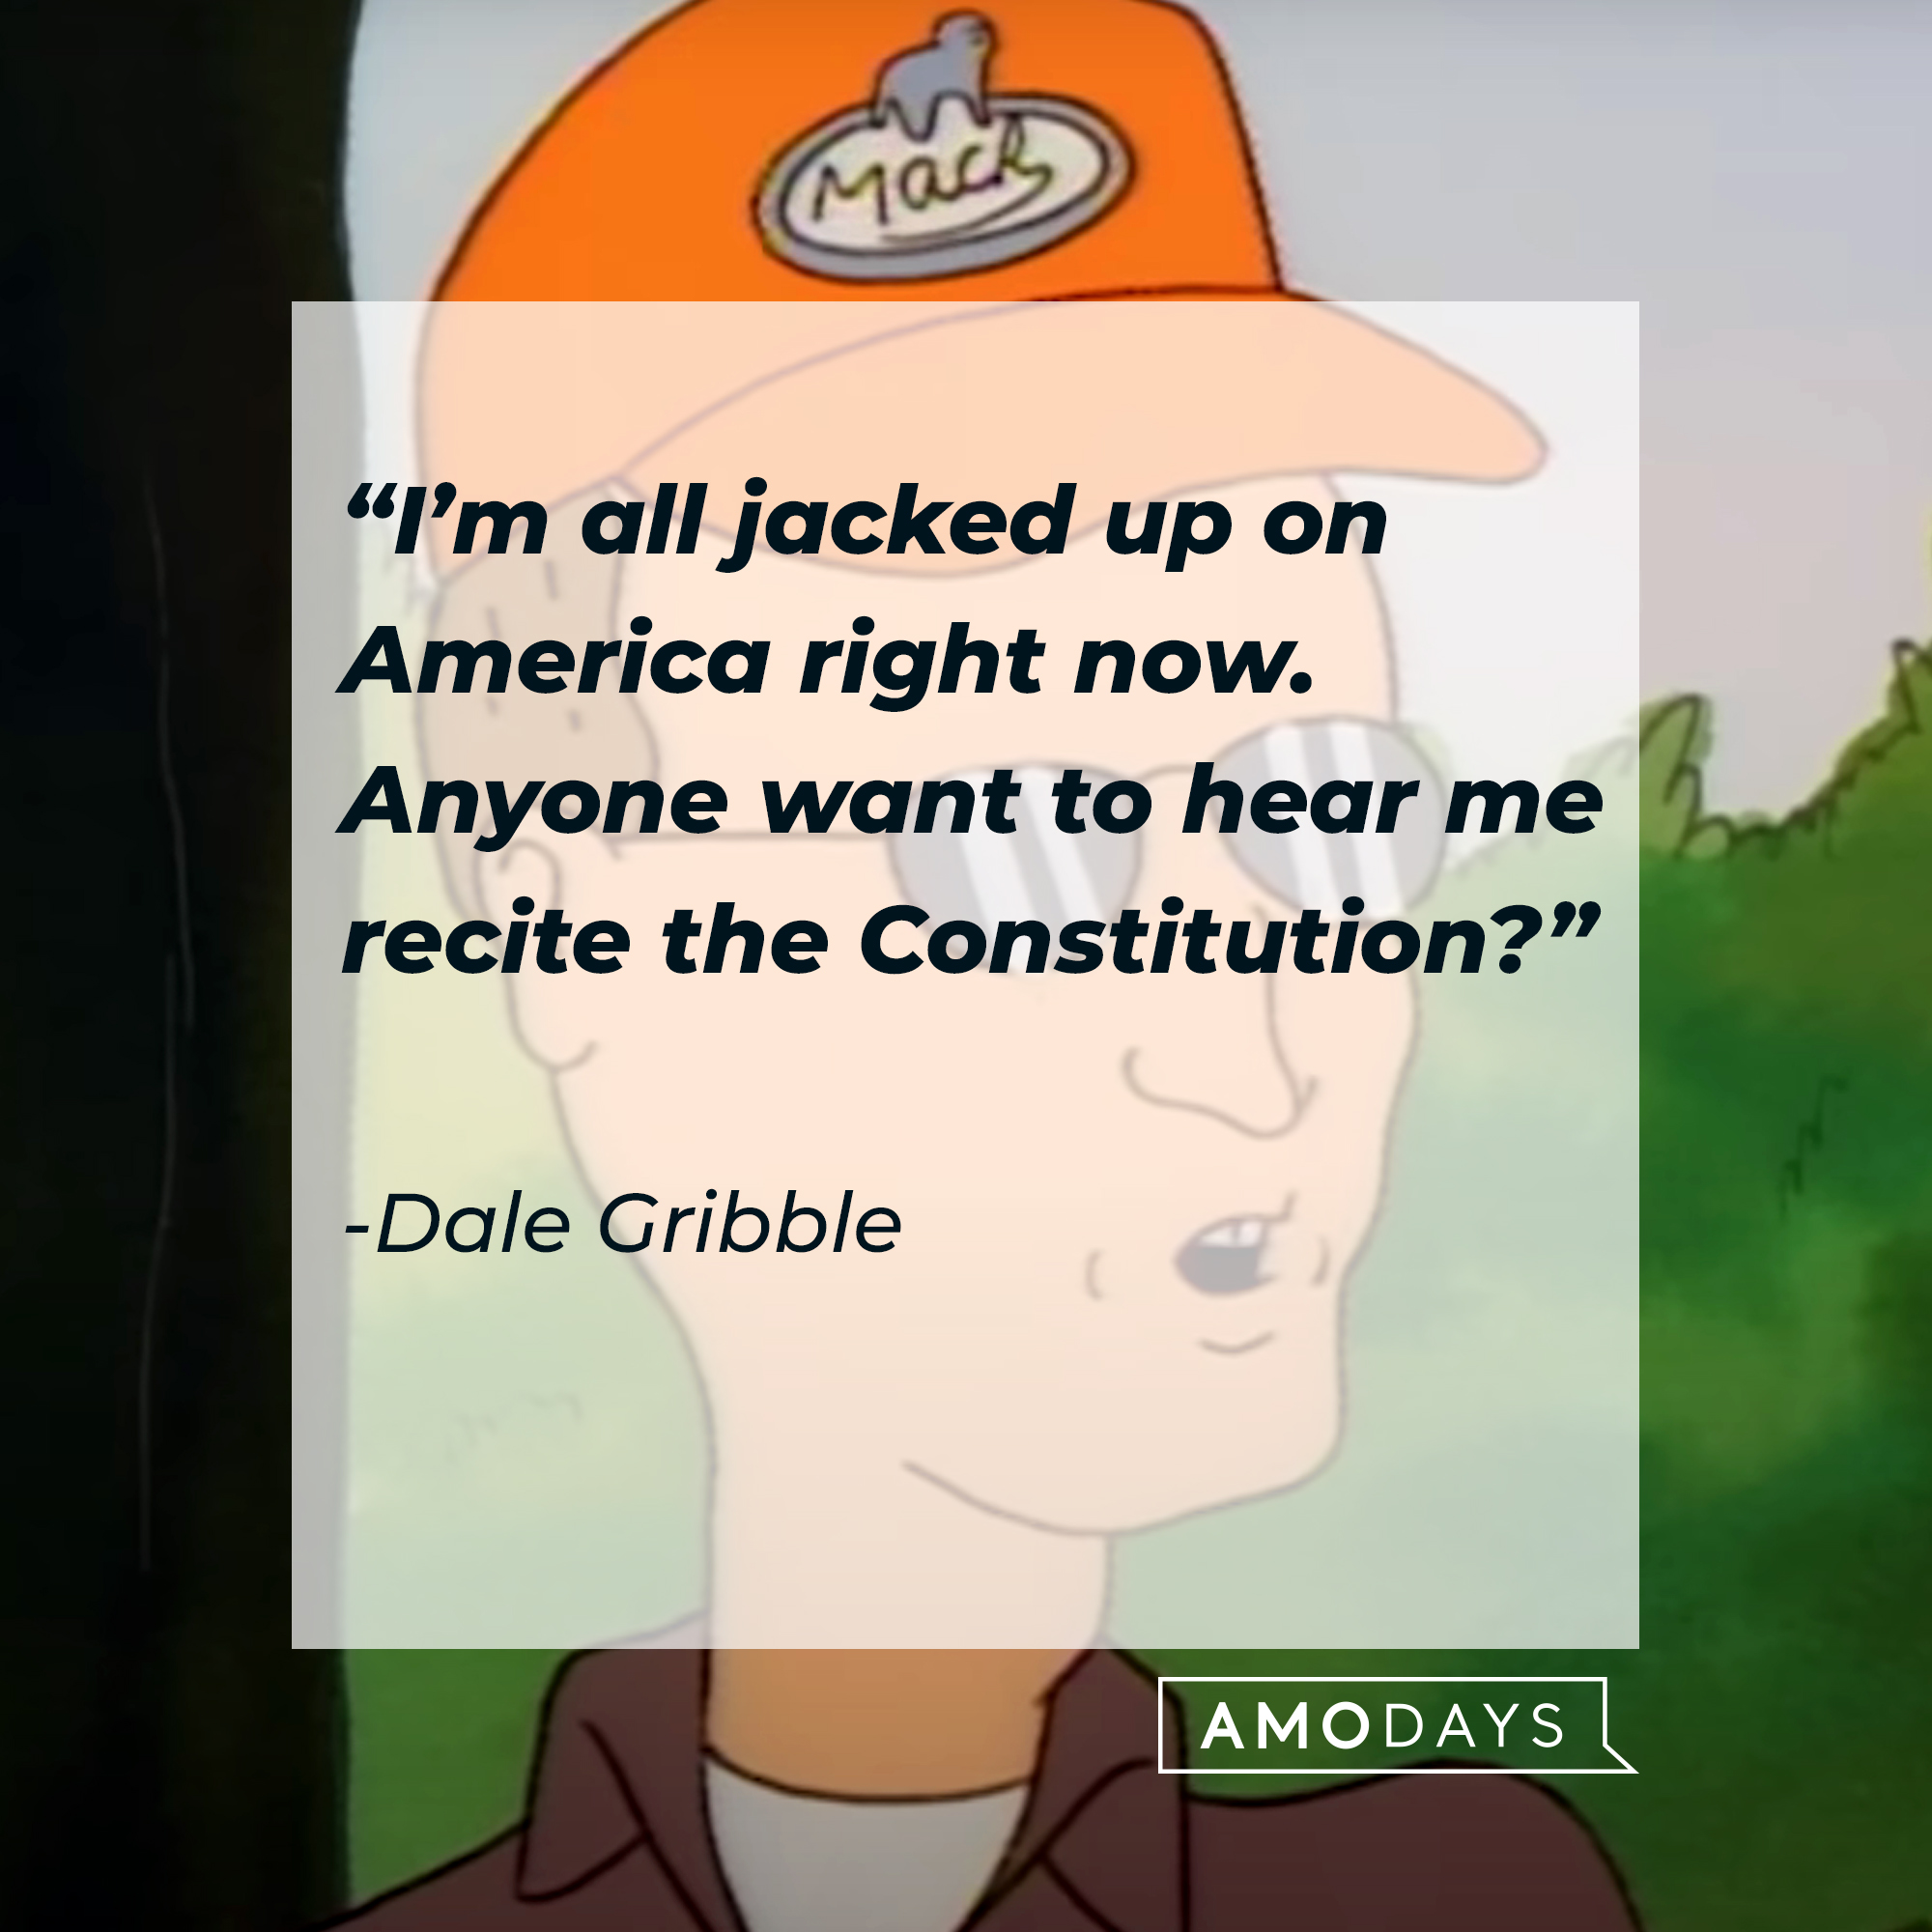 Dale Gribble, with his quote: “I’m all jacked up on America right now. Anyone want to hear me recite the Constitution?” | Source: Youtube.com/adultswim